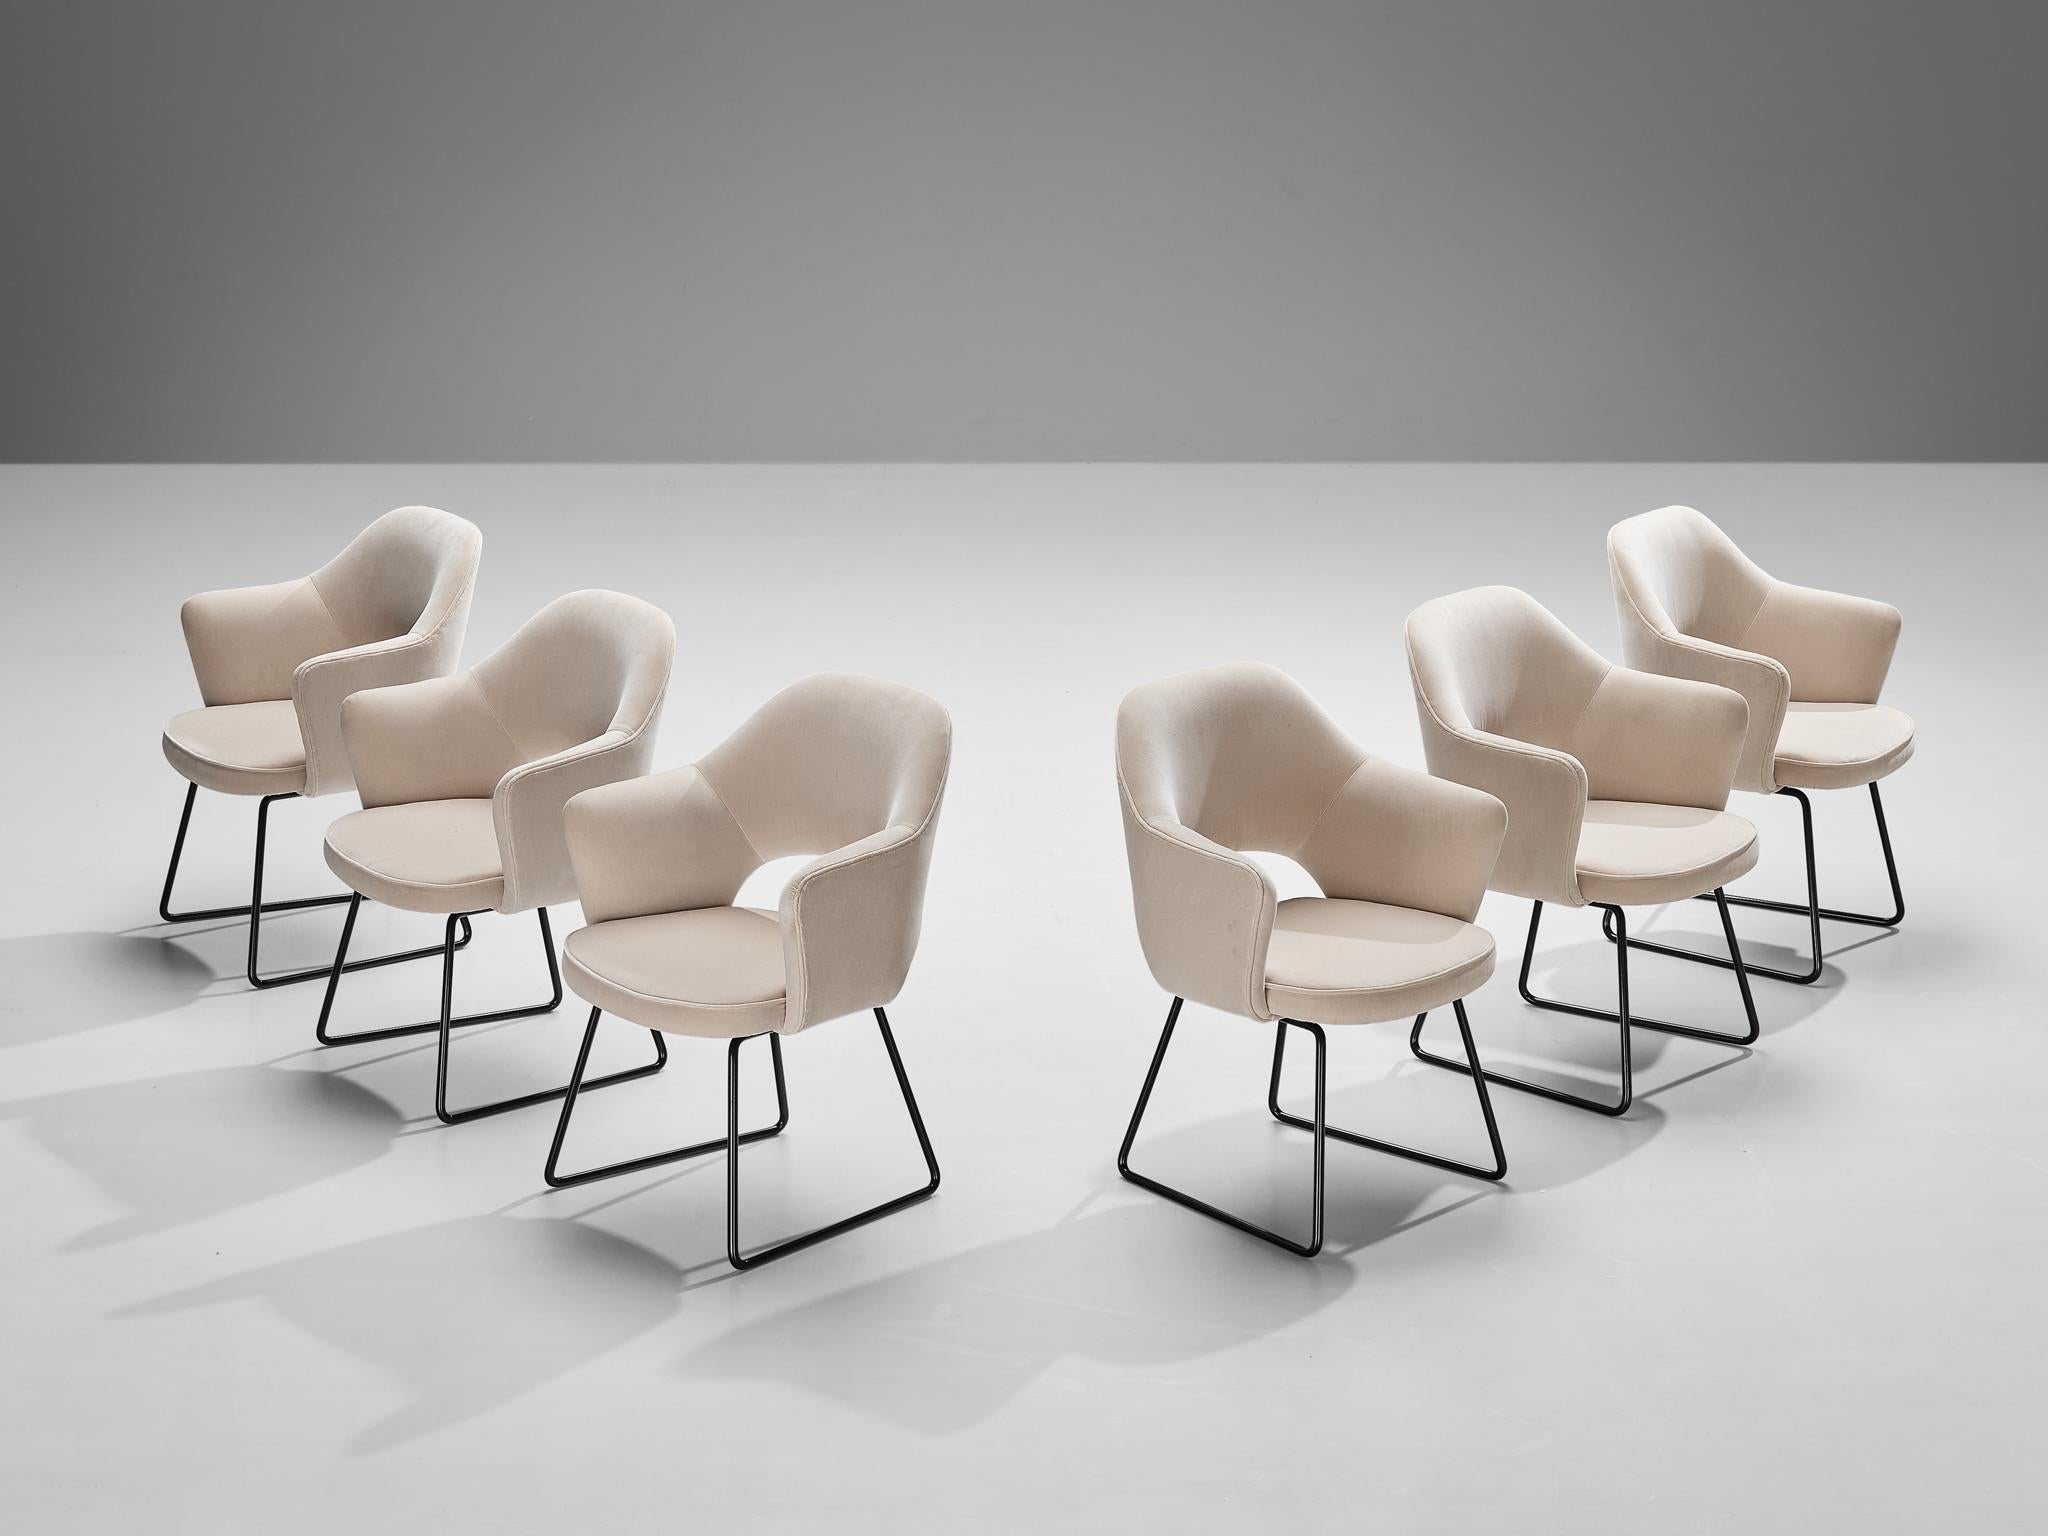 Eero Saarinen for Knoll International, limited edition ‘Conference’ armchairs, velvet, coated metal, France, Paris, designed in 1957

This set of armchairs was commissioned by the UNESCO Headquarters located in Paris. This iconic building was